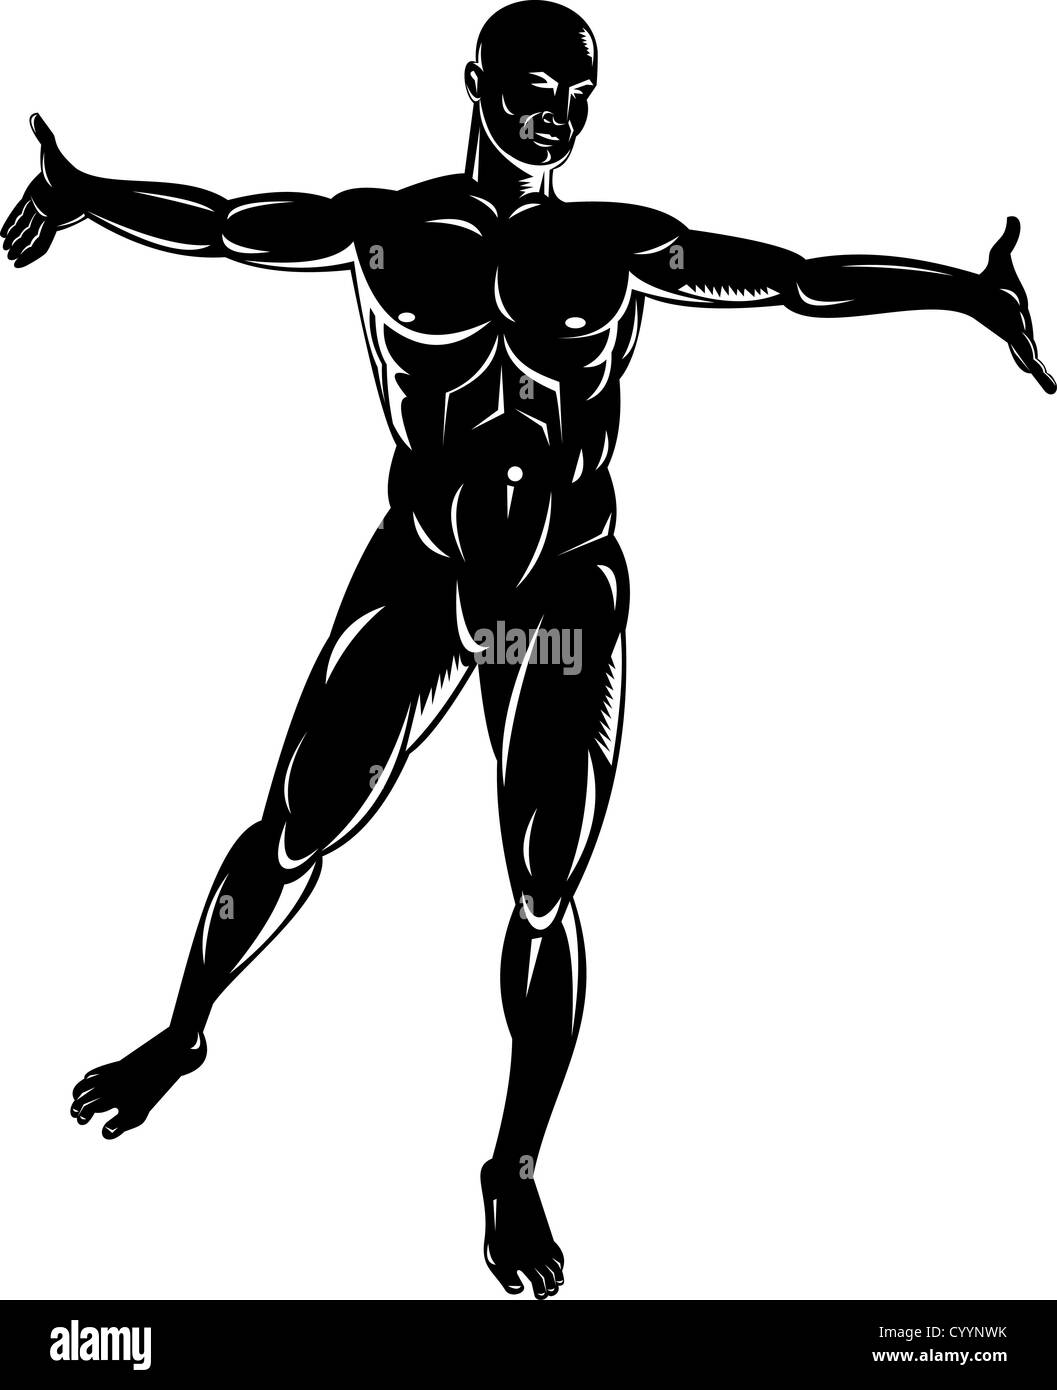 illustration on the human anatomy showing a male standing on isolated background Stock Photo